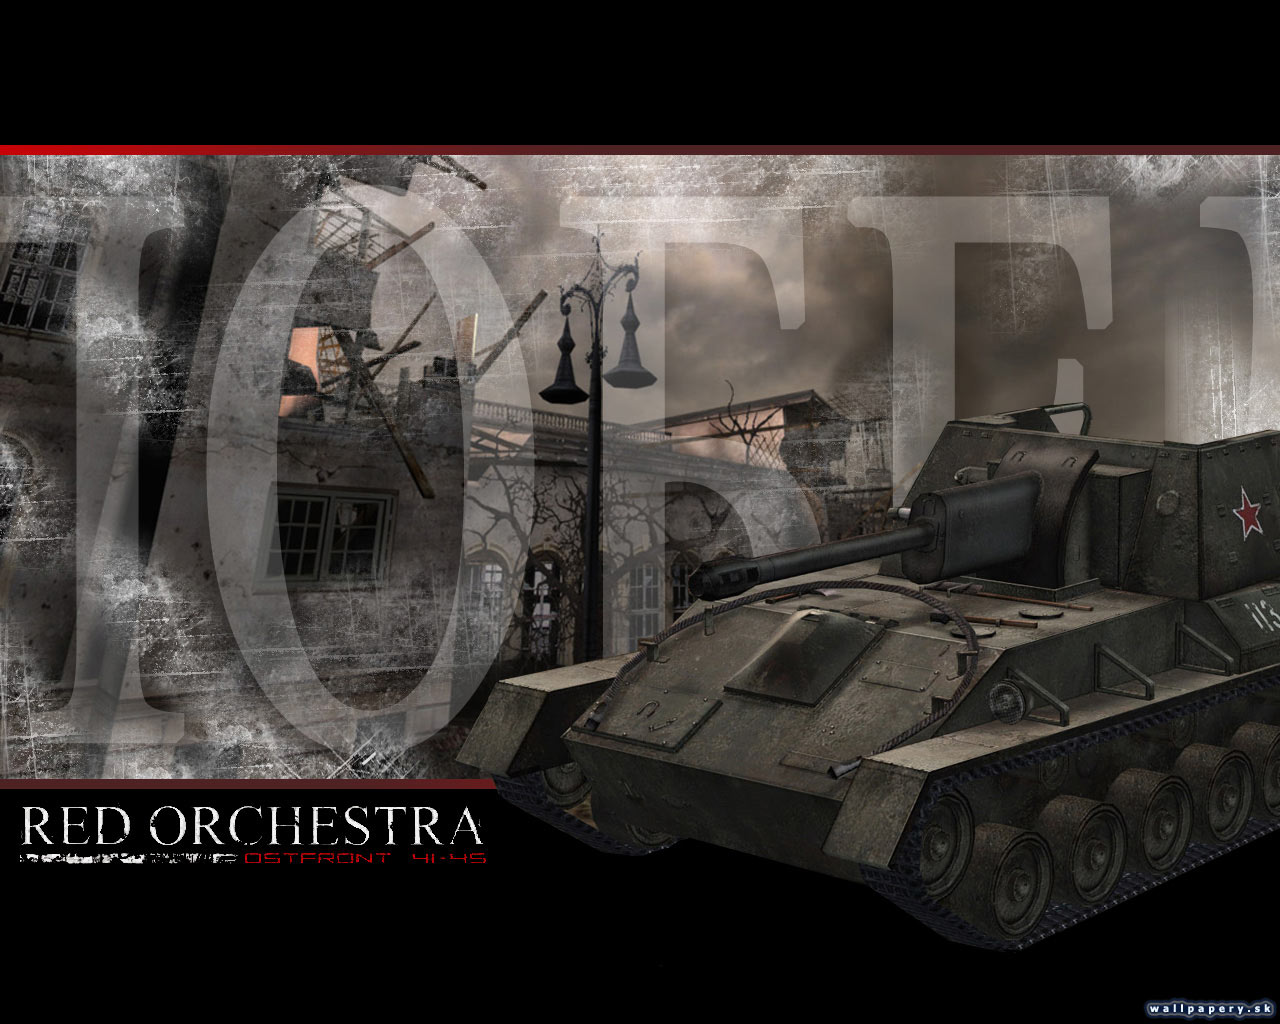 Red Orchestra: Ostfront 41-45 - wallpaper 10